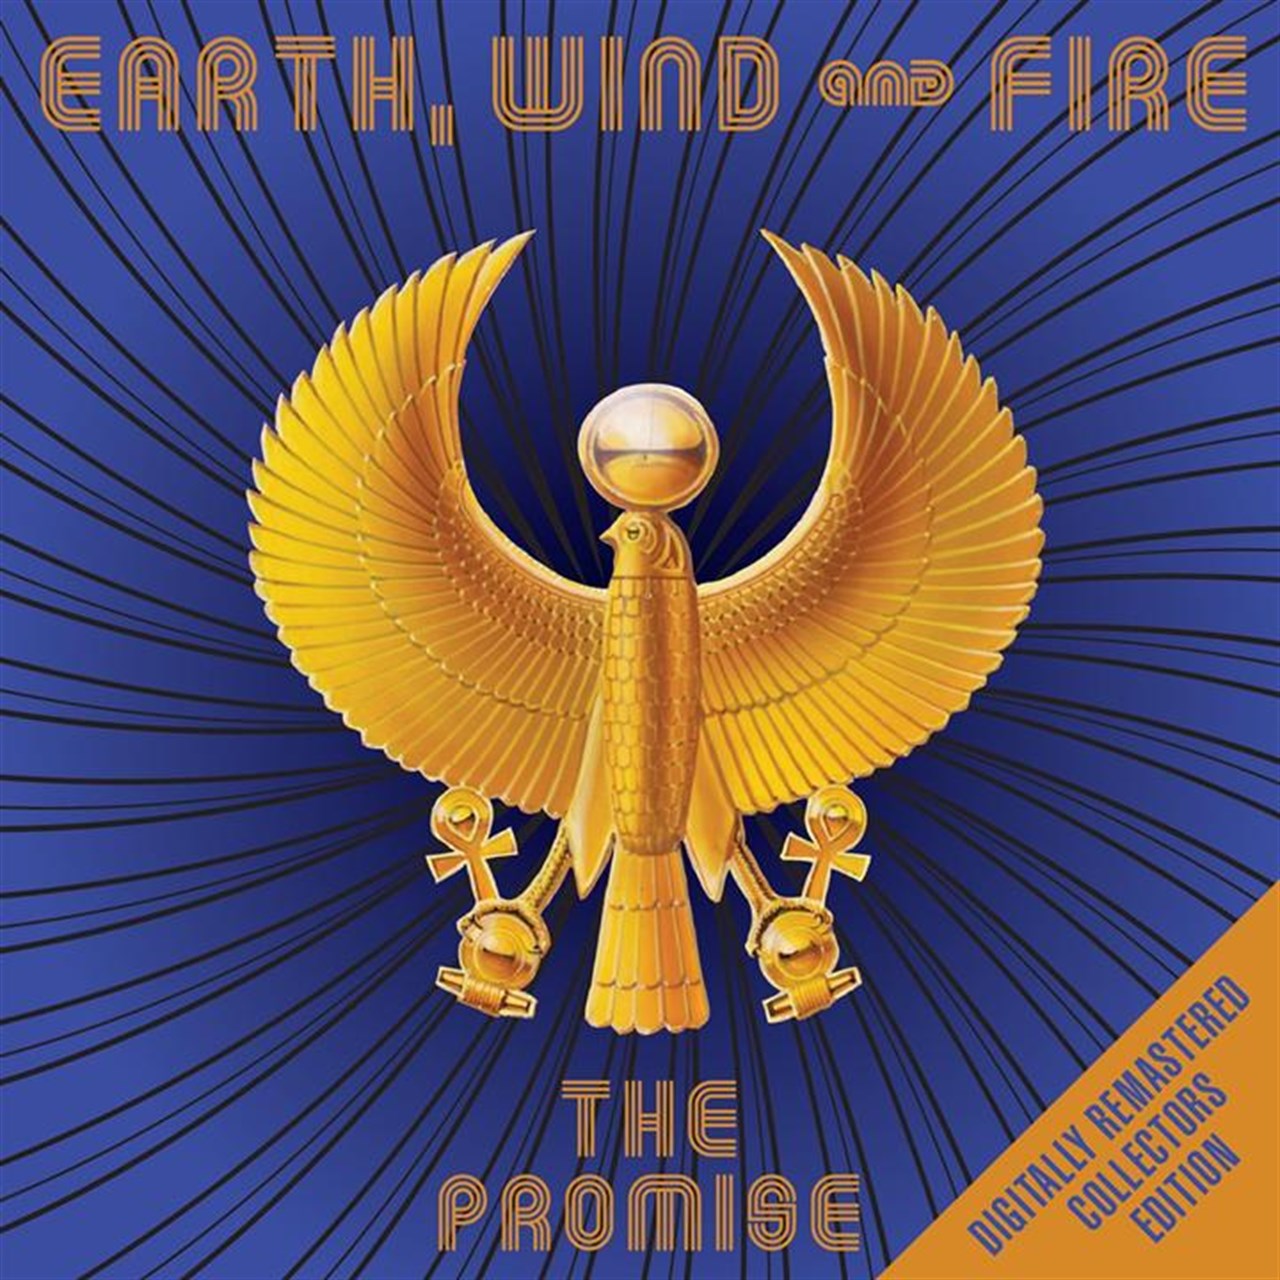 Art for Betcha' by Earth, Wind & Fire